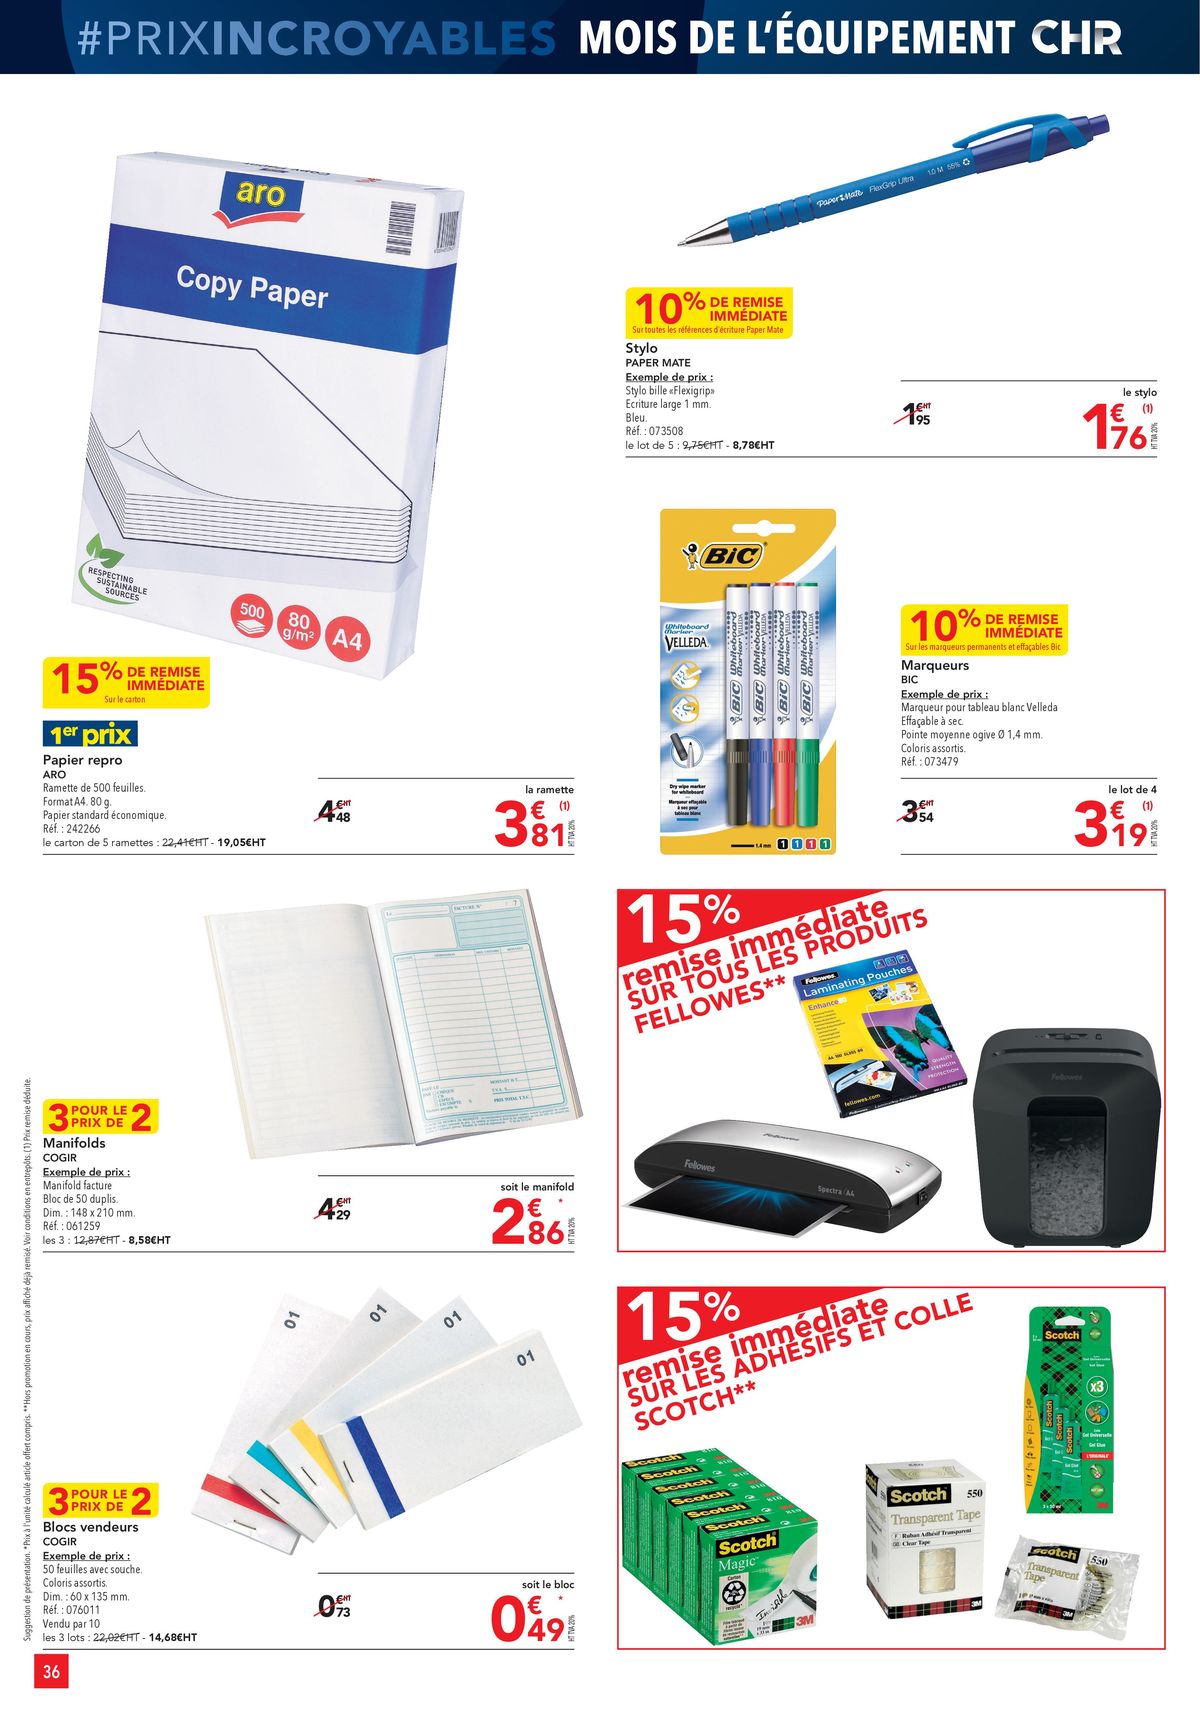 Catalogue SELECTION PROMO EQUIPEMENT, page 00036